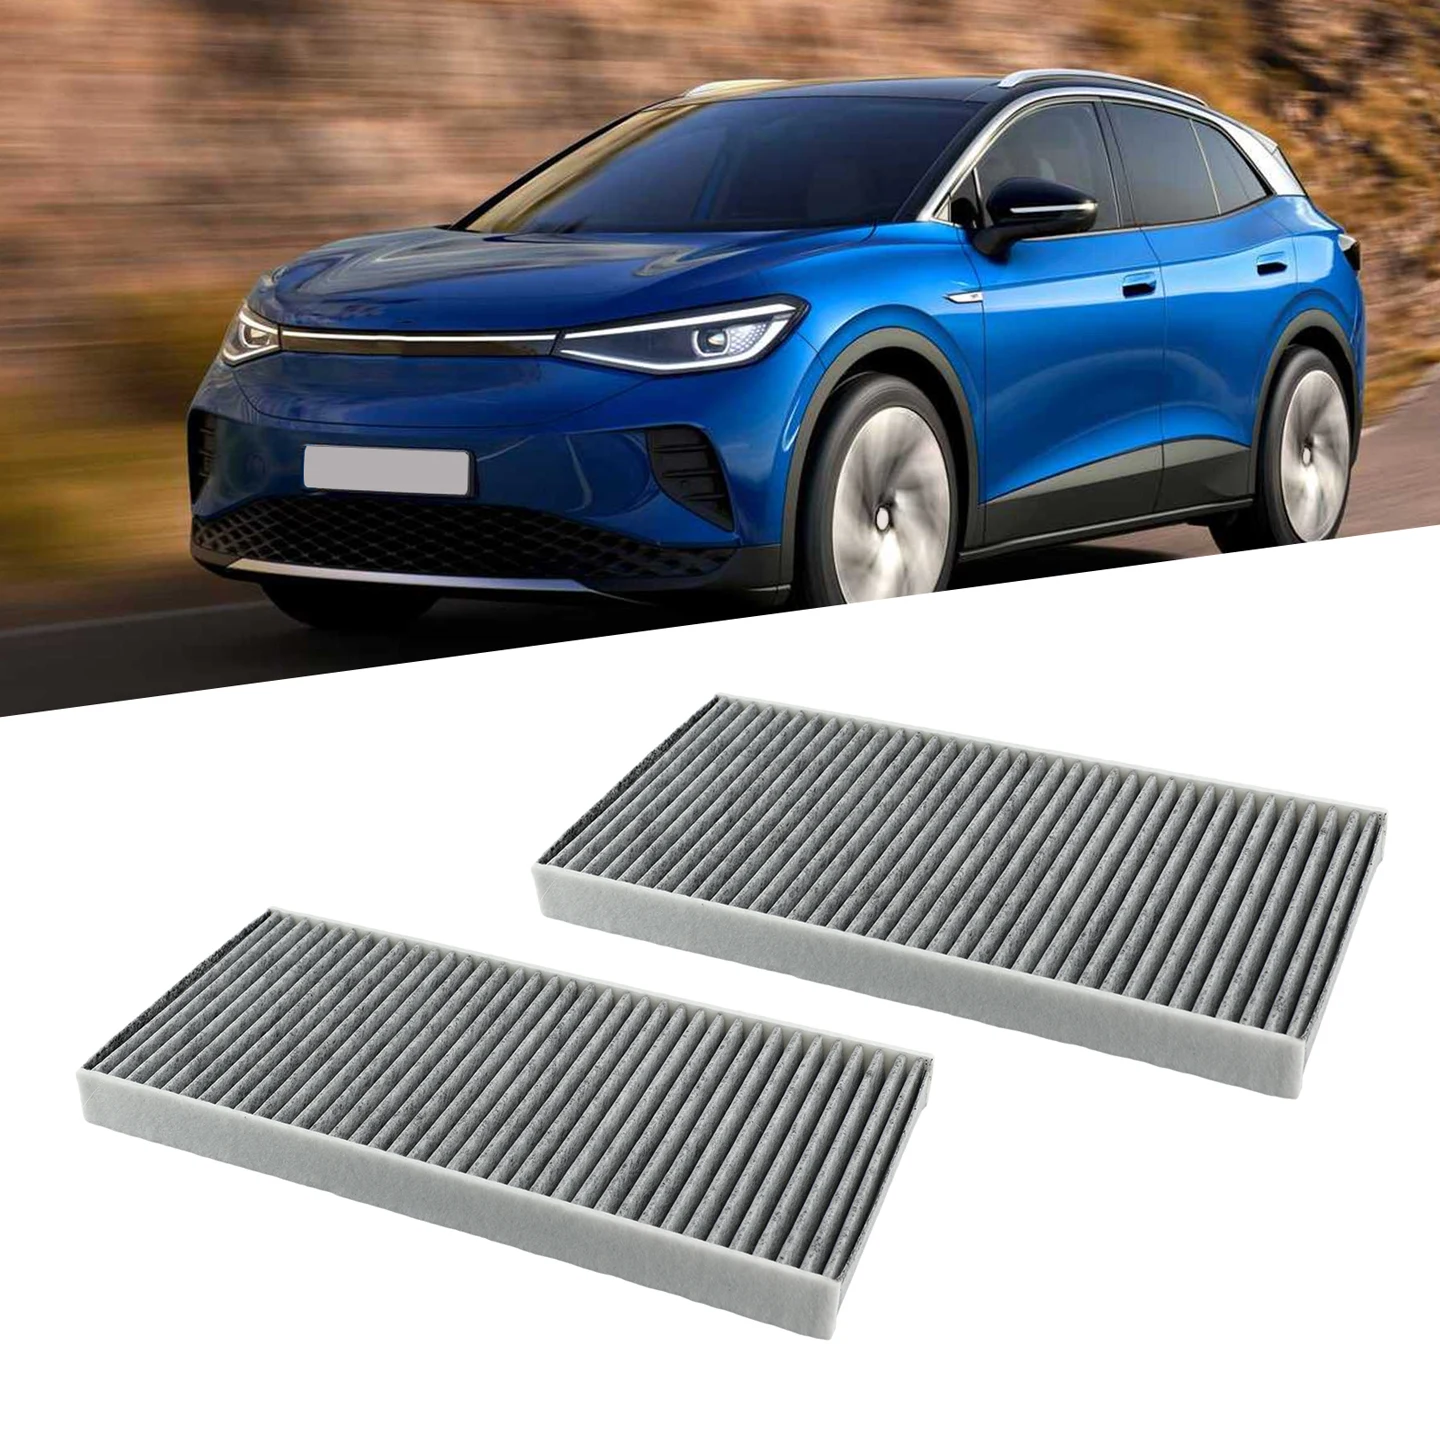 

2X For ID.4 Crozz SUV 2020 2021 2022 2023 Cabin Filters Car Accessories Goods Air Conditioner Filter Compartments